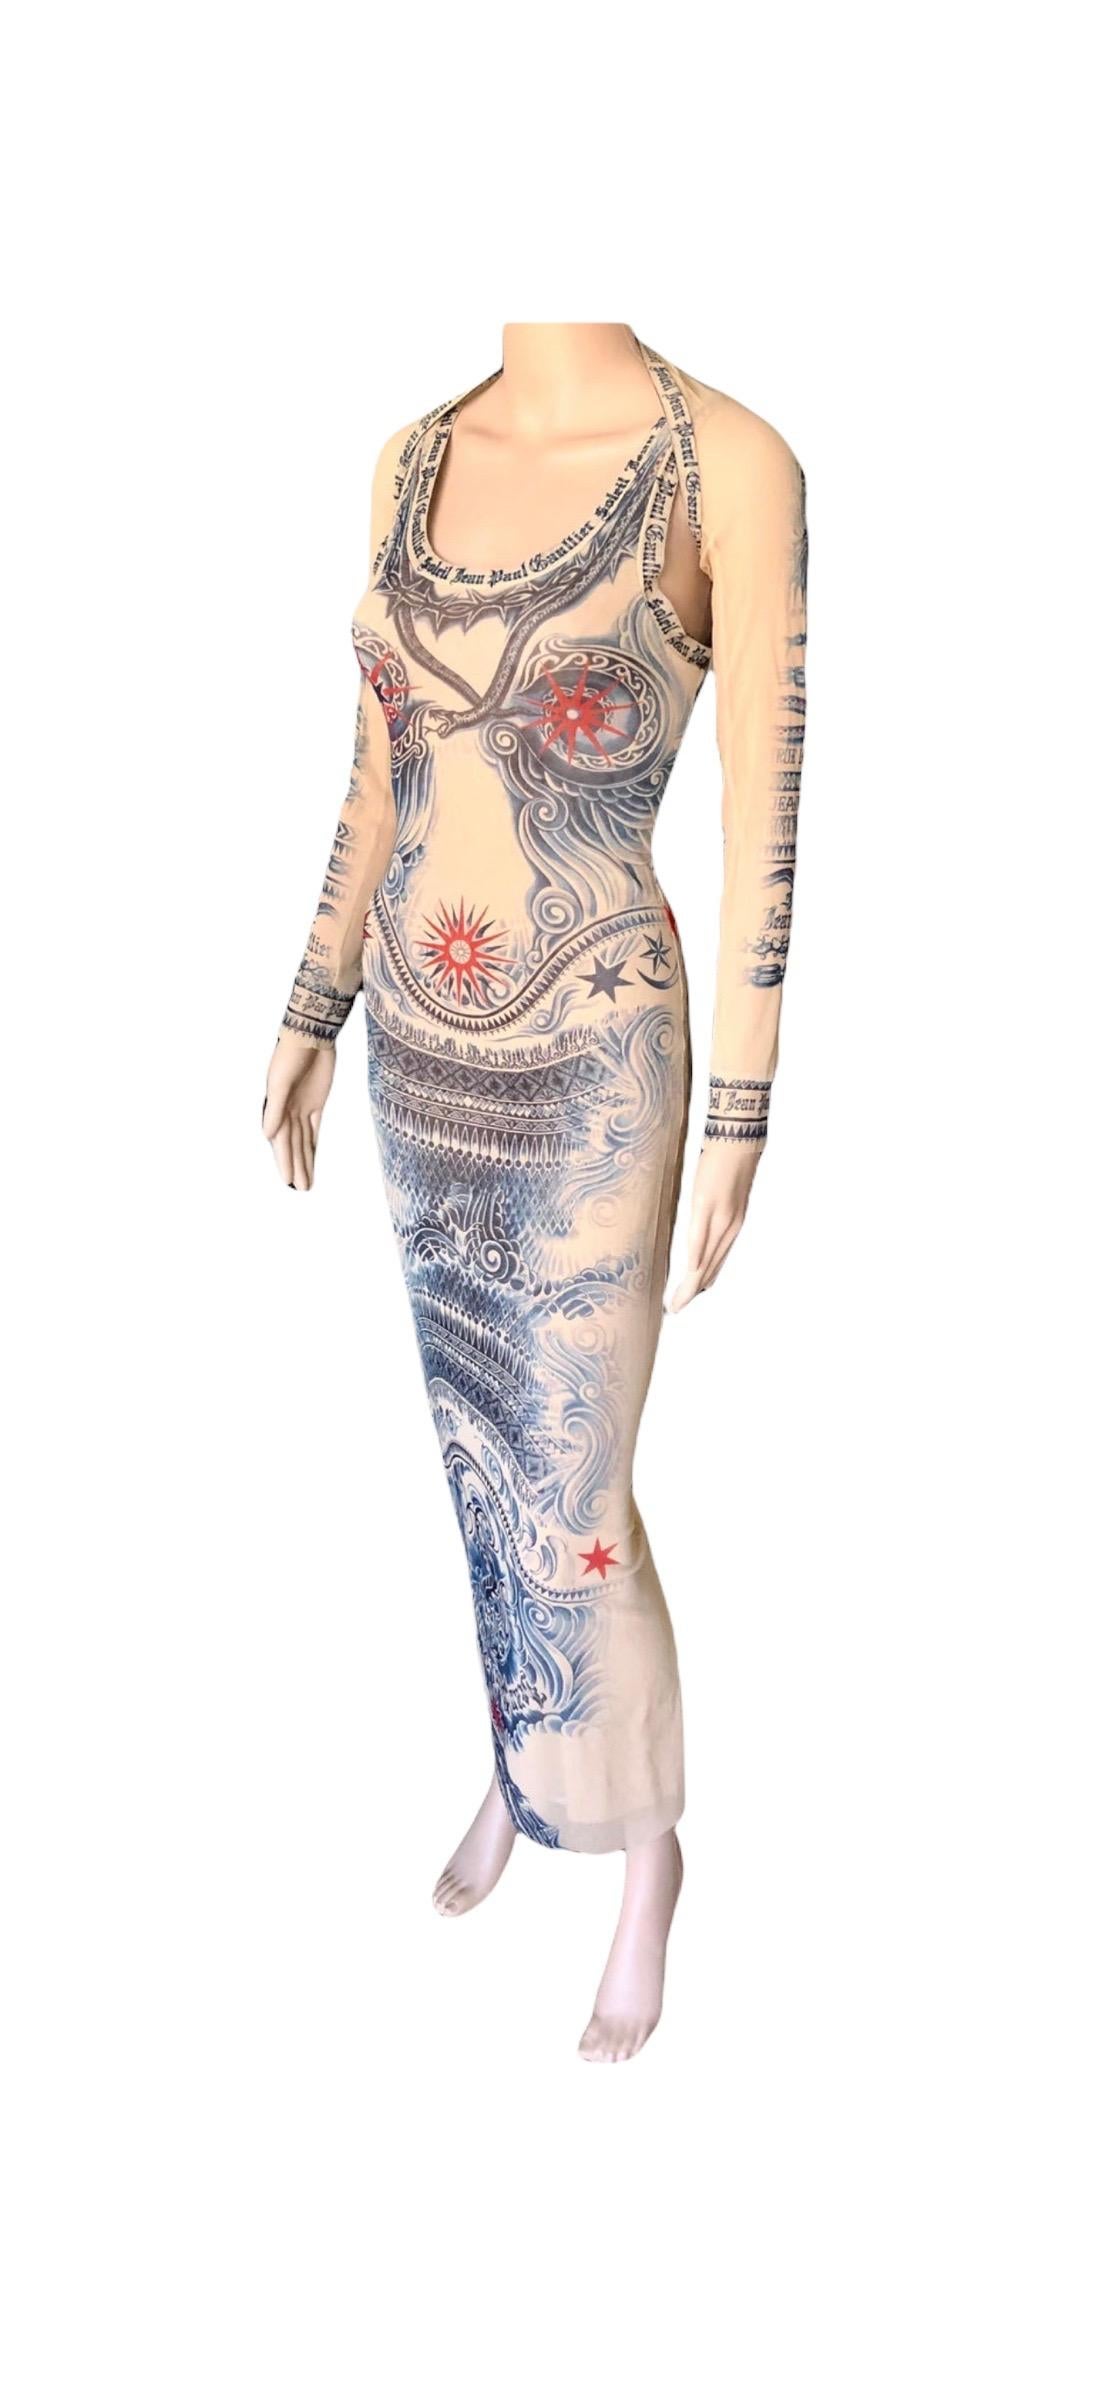 Jean Paul Gaultier Soleil Vintage Tattoo Bodycon Mesh Bolero and Maxi Dress 2 Piece Set Size M/L

Please note the size tag has been removed from the dress. The bolero is size L.

